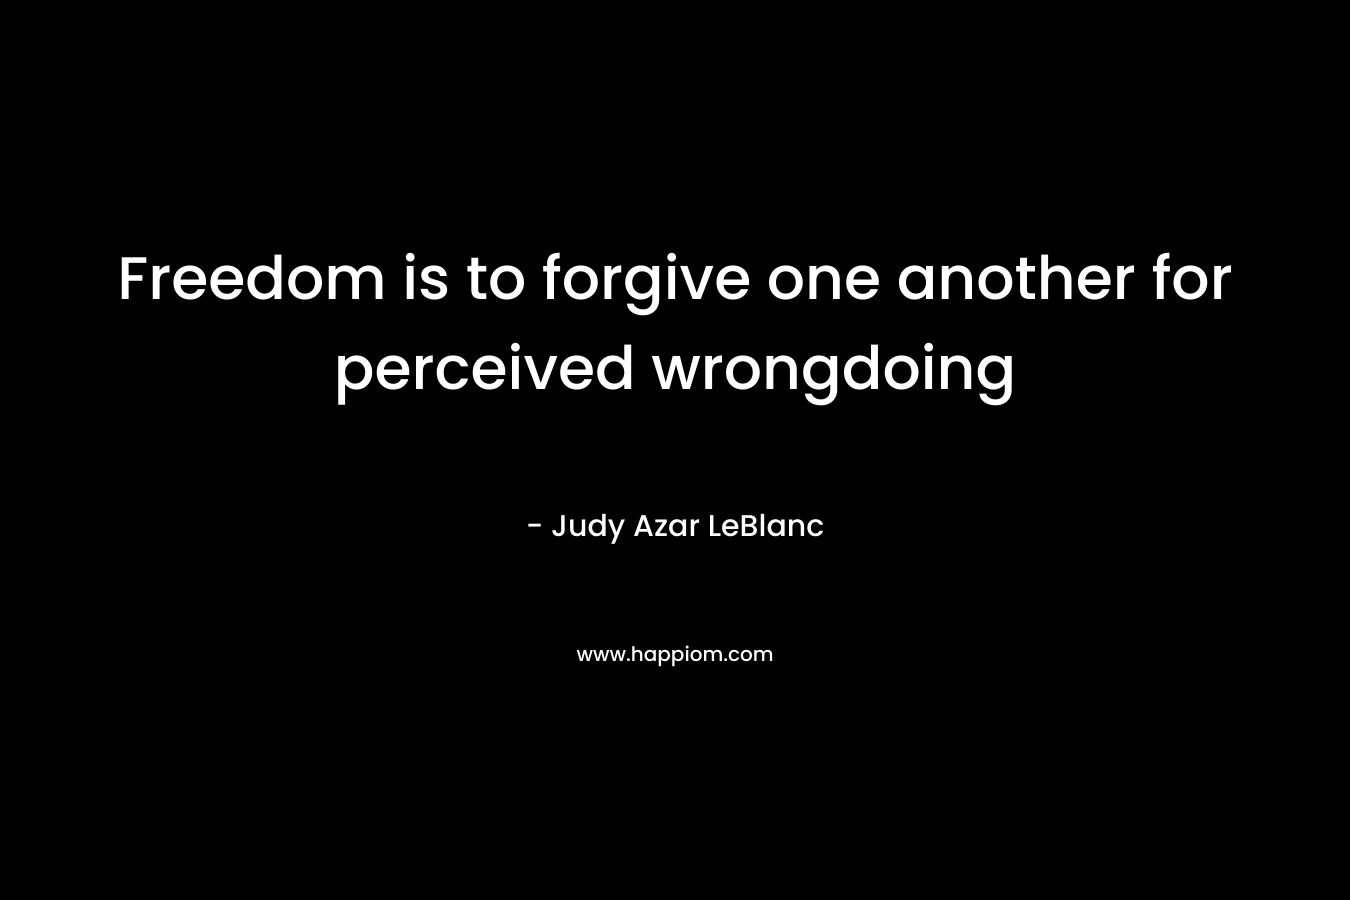 Freedom is to forgive one another for perceived wrongdoing – Judy Azar LeBlanc